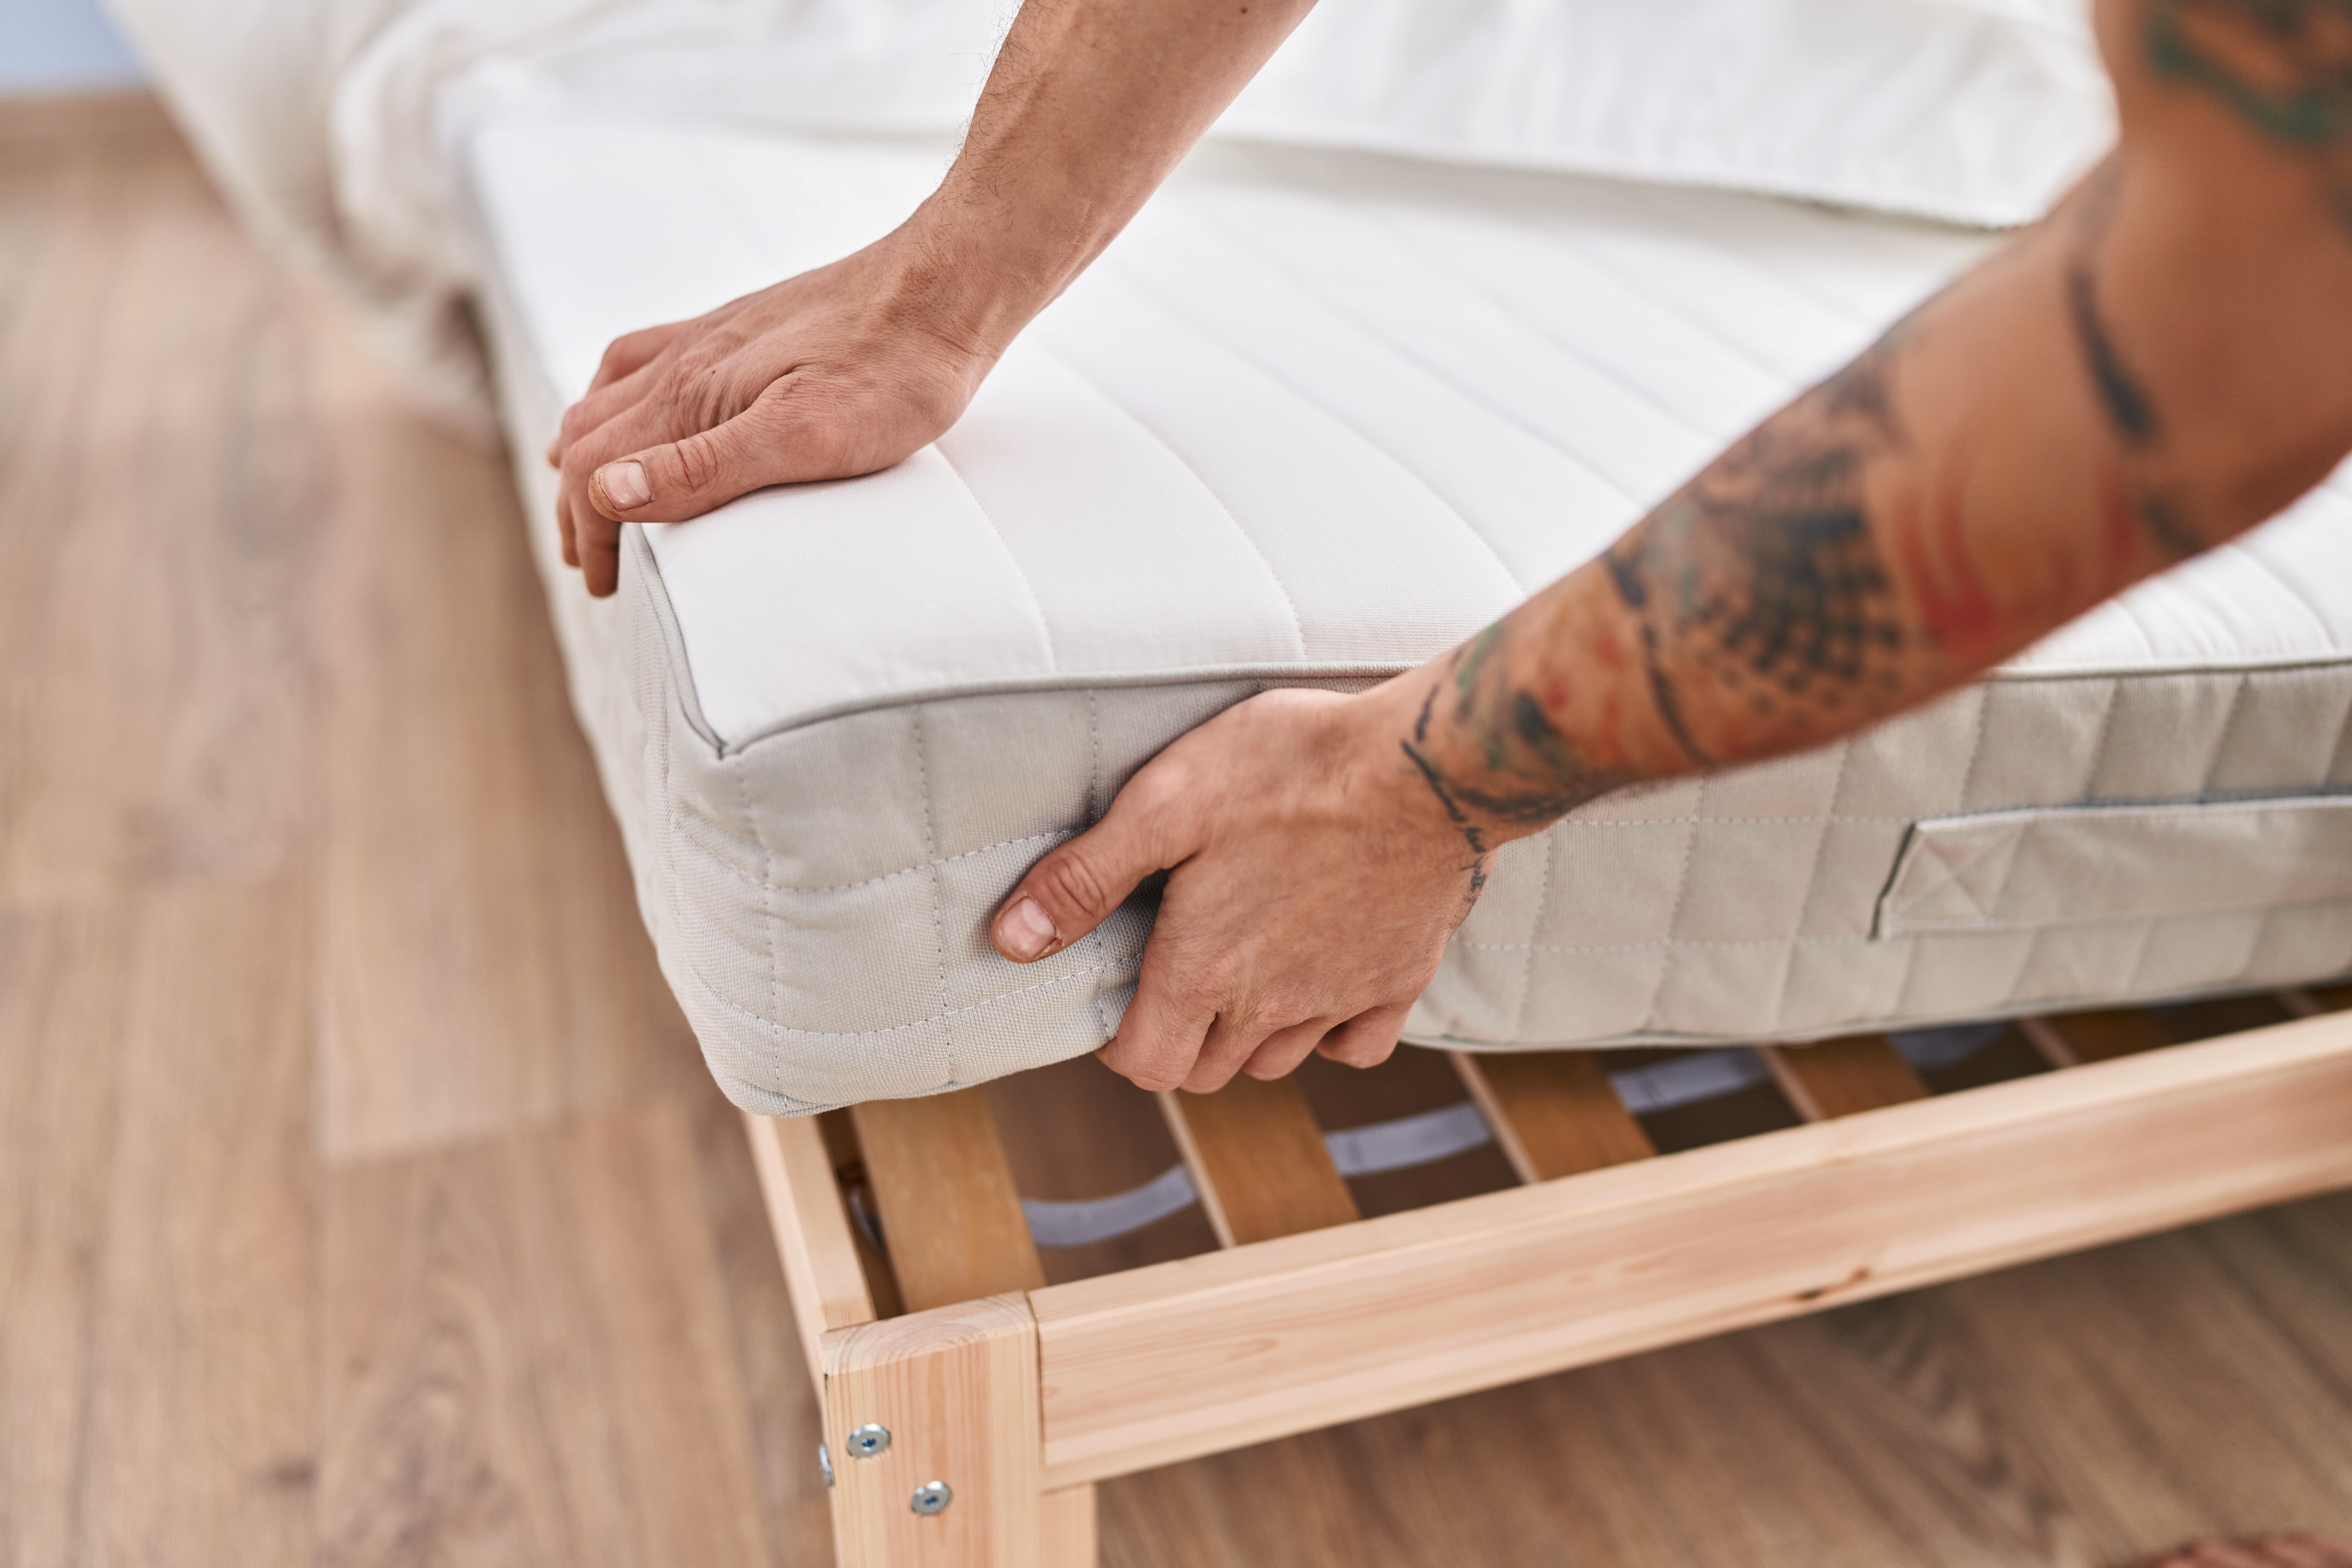 A Guide to Choosing the Perfect Mattress for Your Adjustable Bed